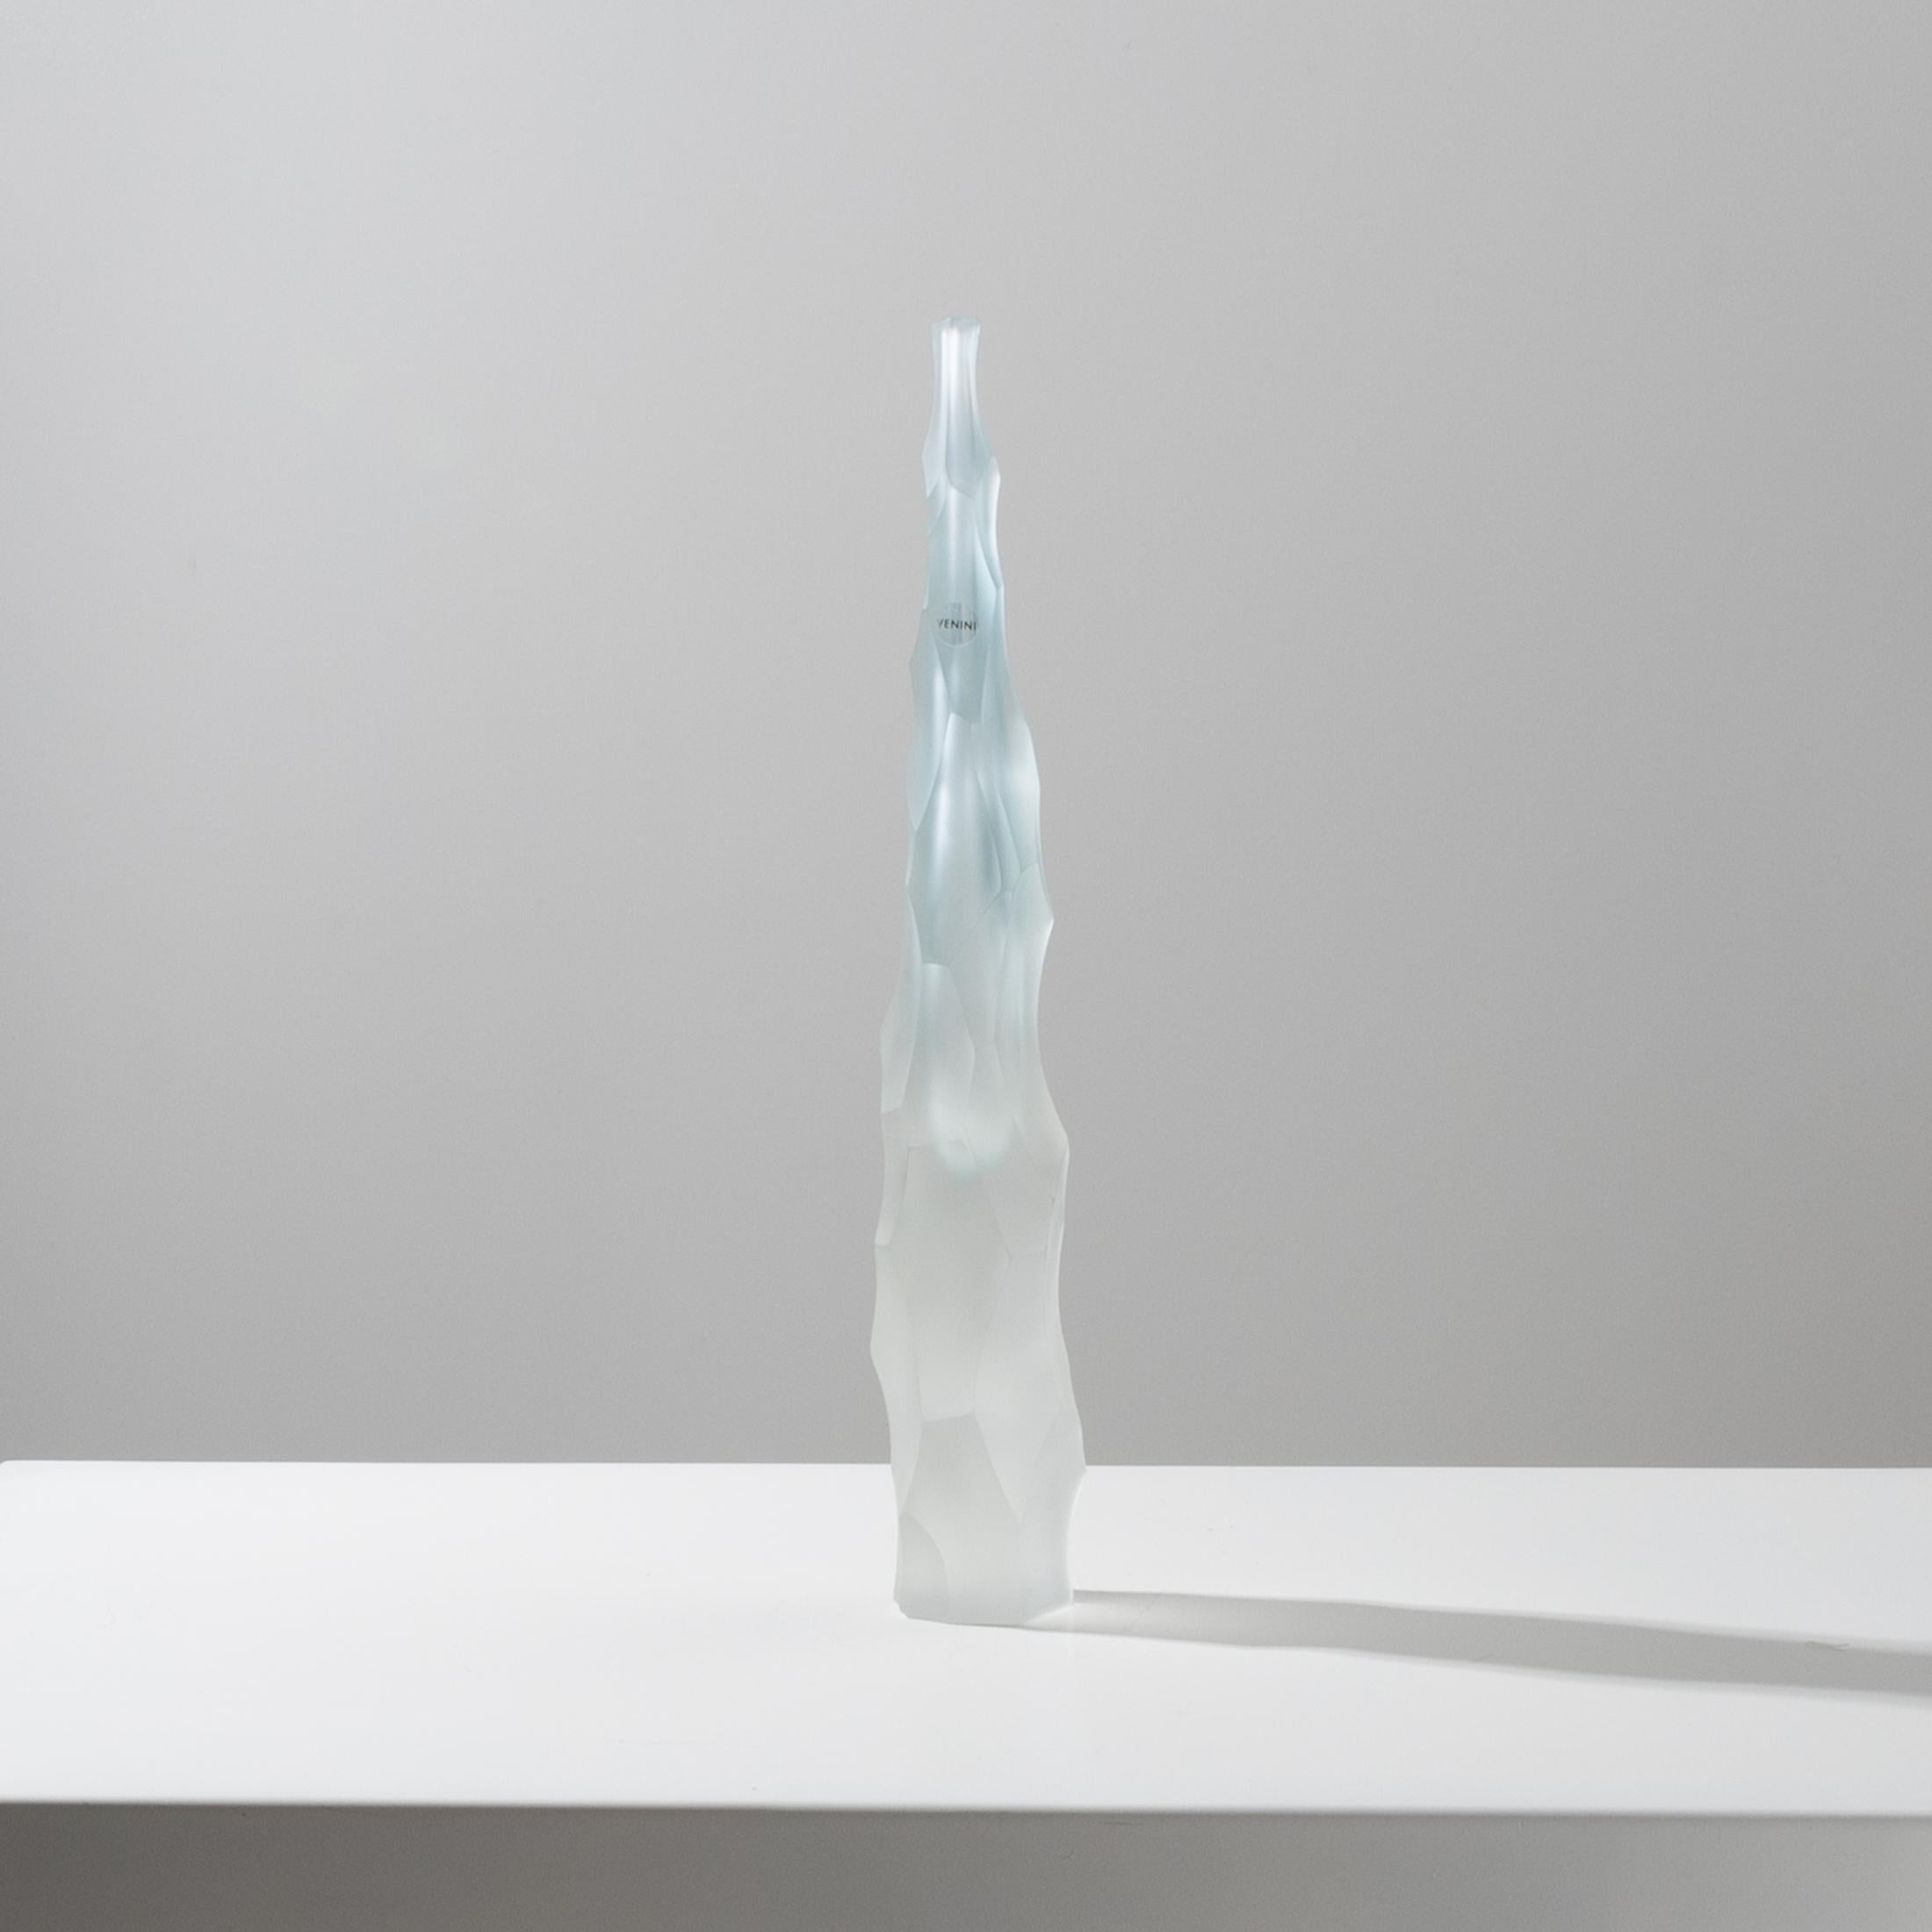 Sculpture in translucent glass whose interior has a 